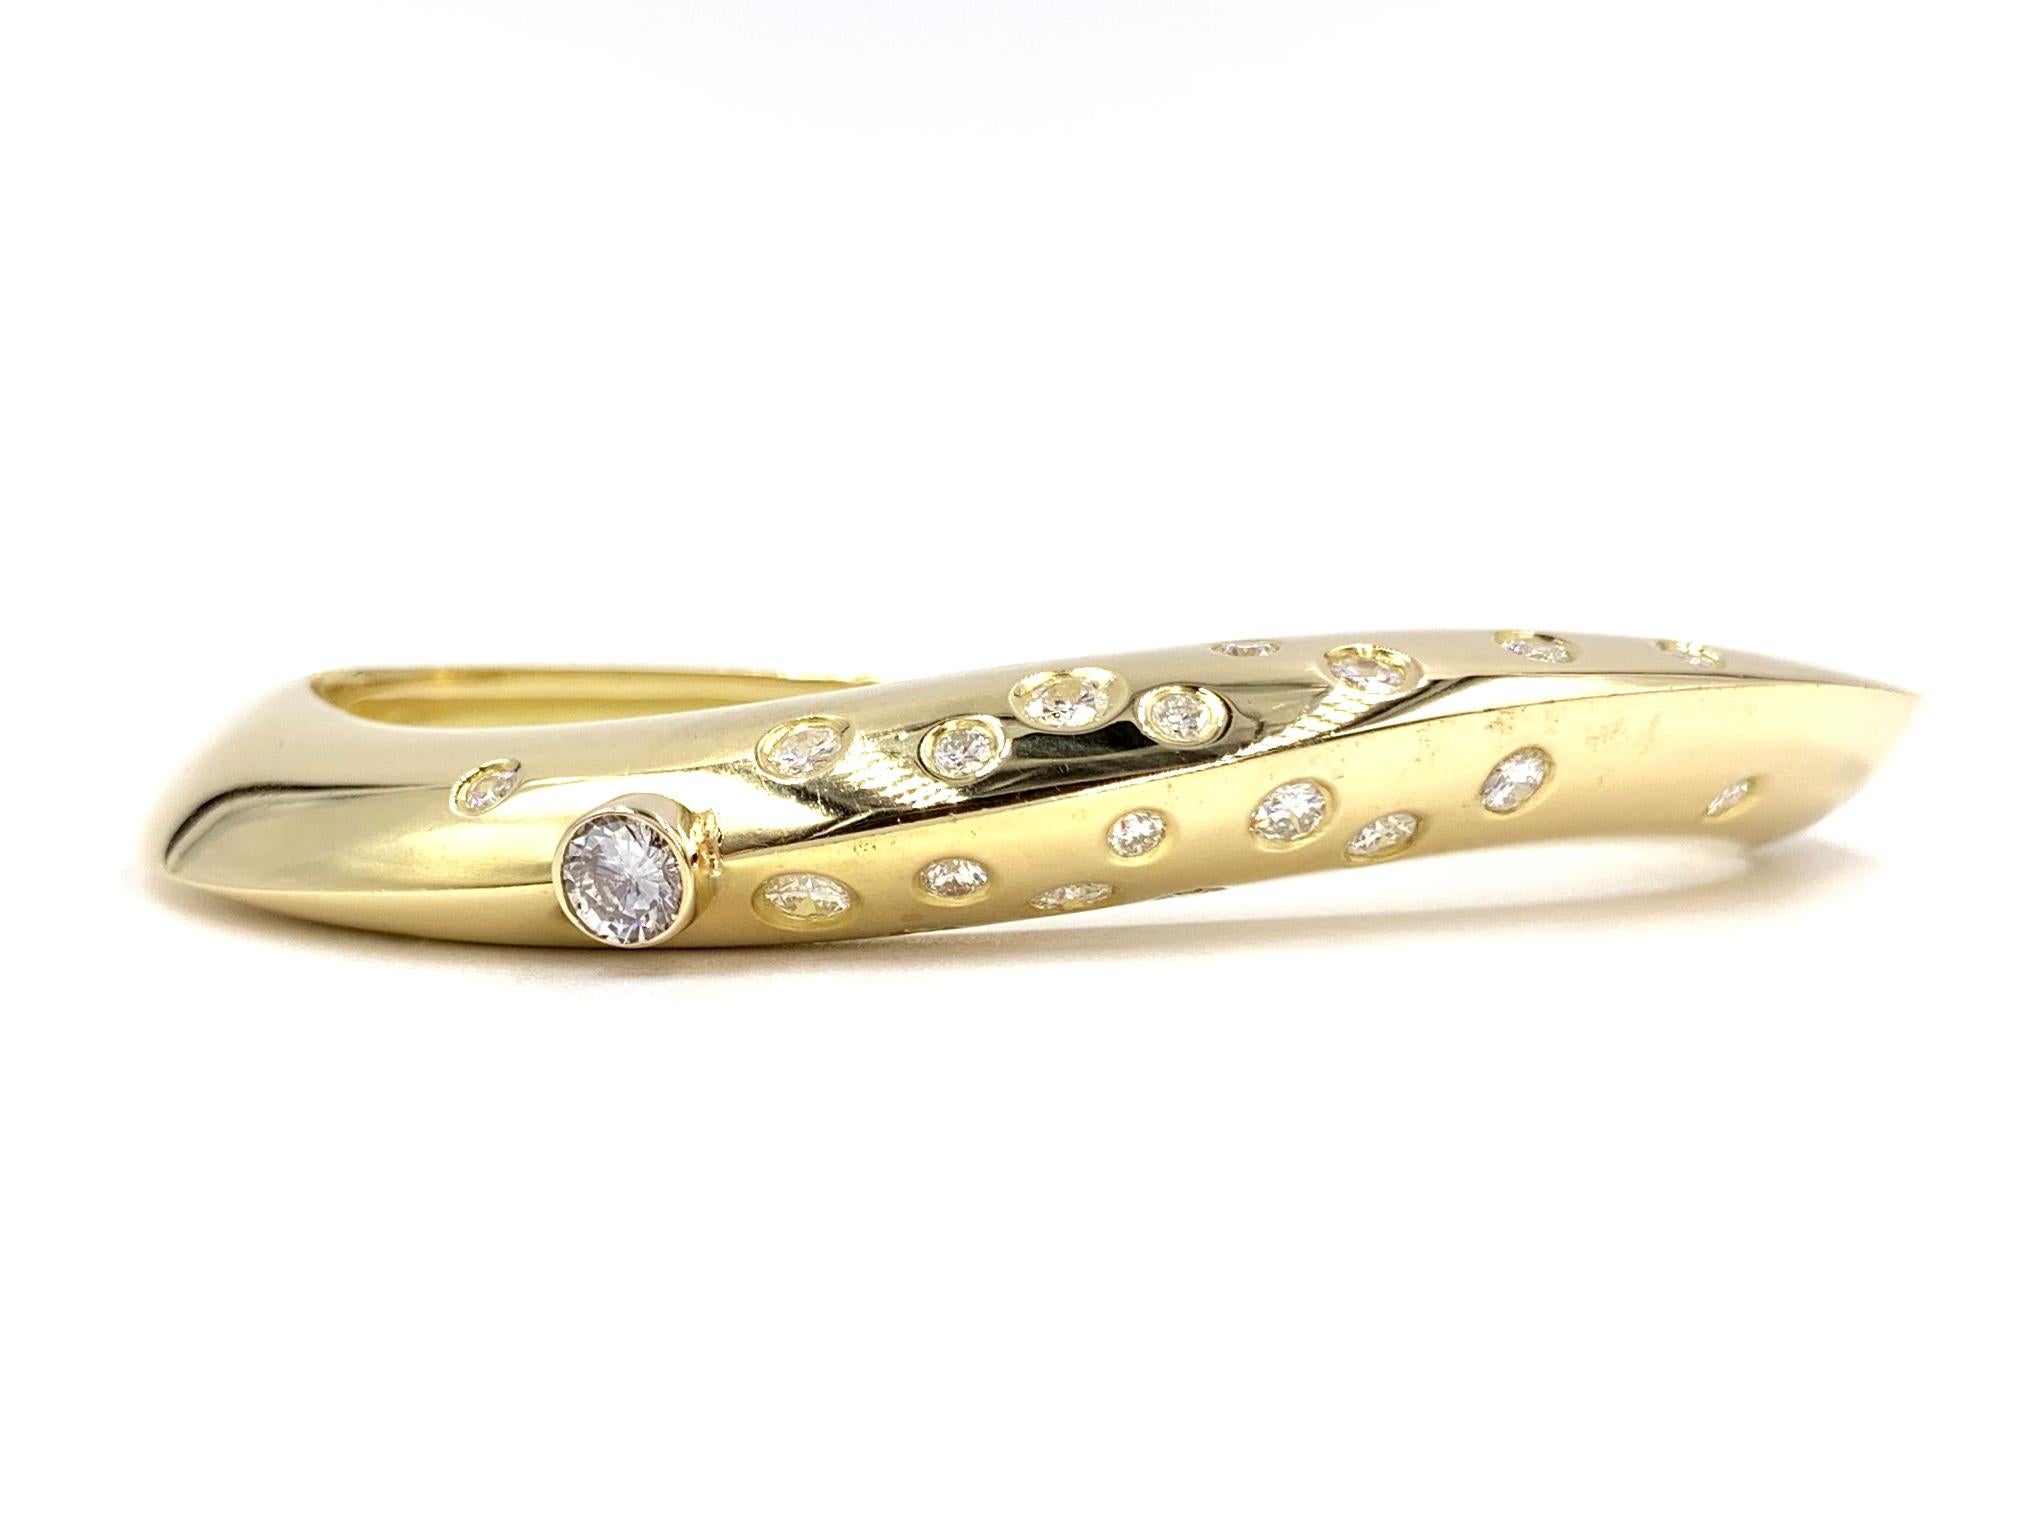 Created by Thomas Michaels Designs, this solid 18 karat yellow gold sleek oval bangle features 1.55 carats of round brilliant diamonds that are beautifully scattered throughout the top of the bracelet. Bangle has an asymmetrically designed curve